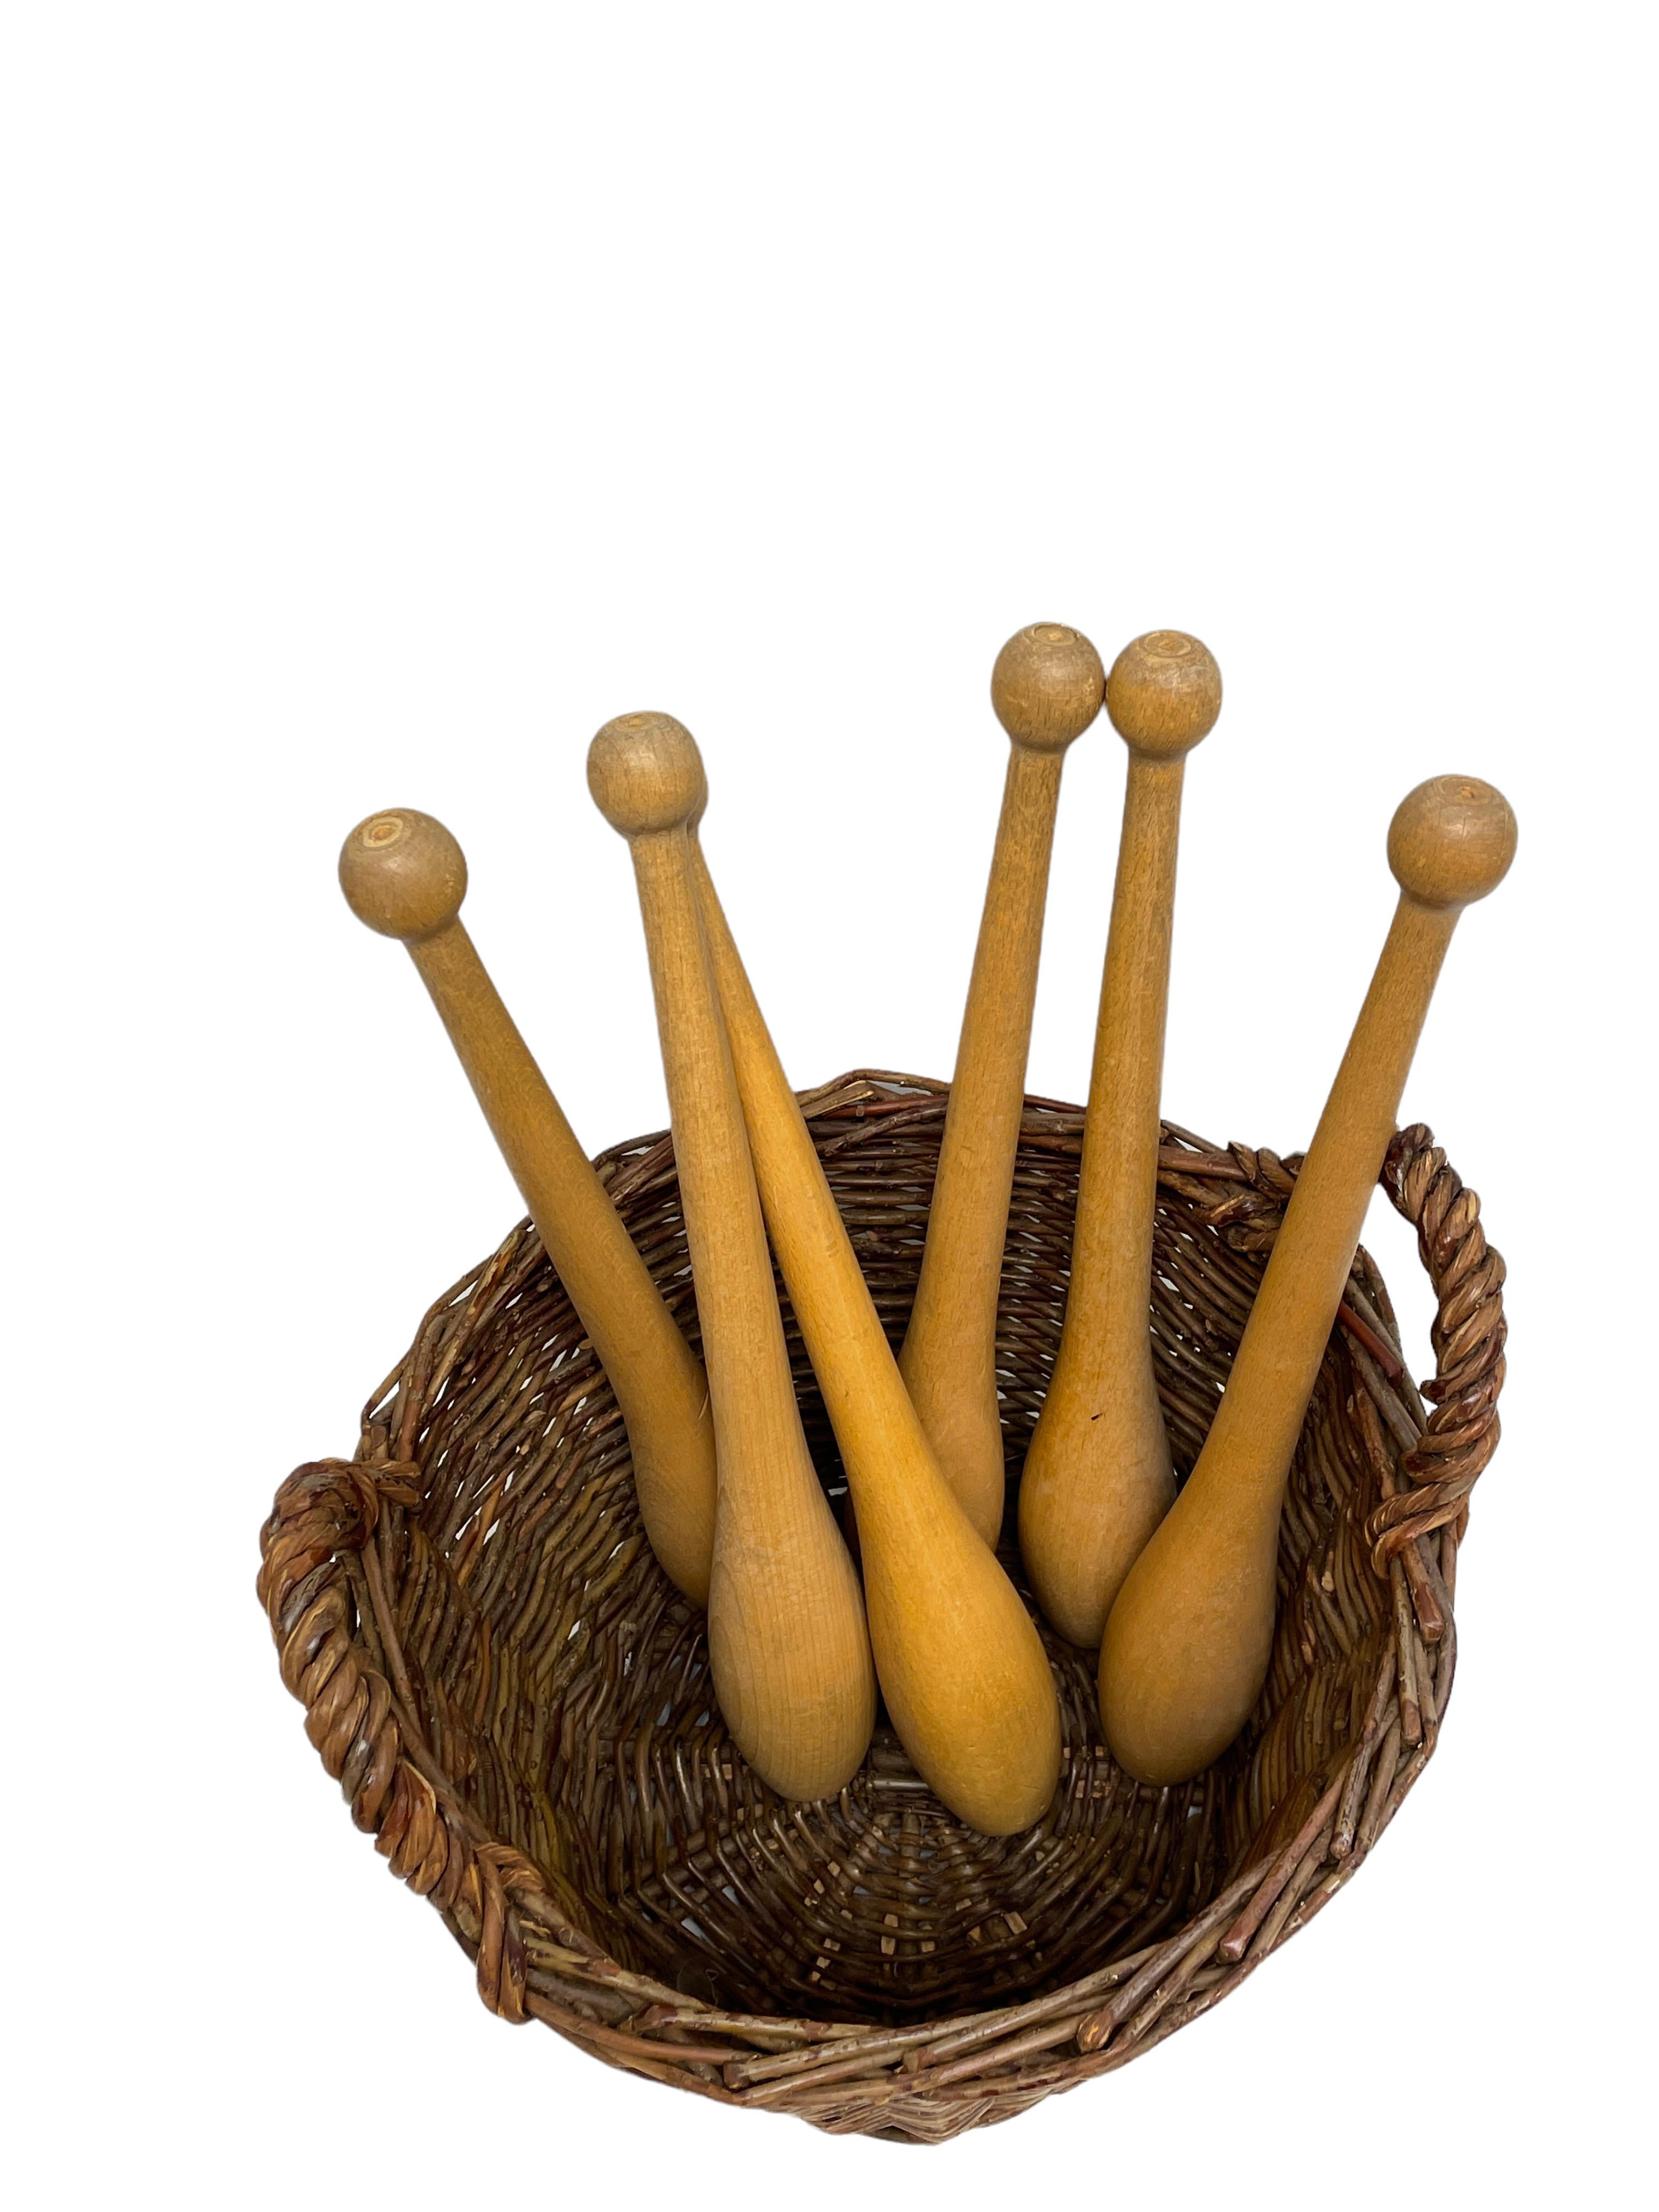 Set of Six wooden Gymnastic Clubs, with Storage Wicker Basket, Vintage German For Sale 2